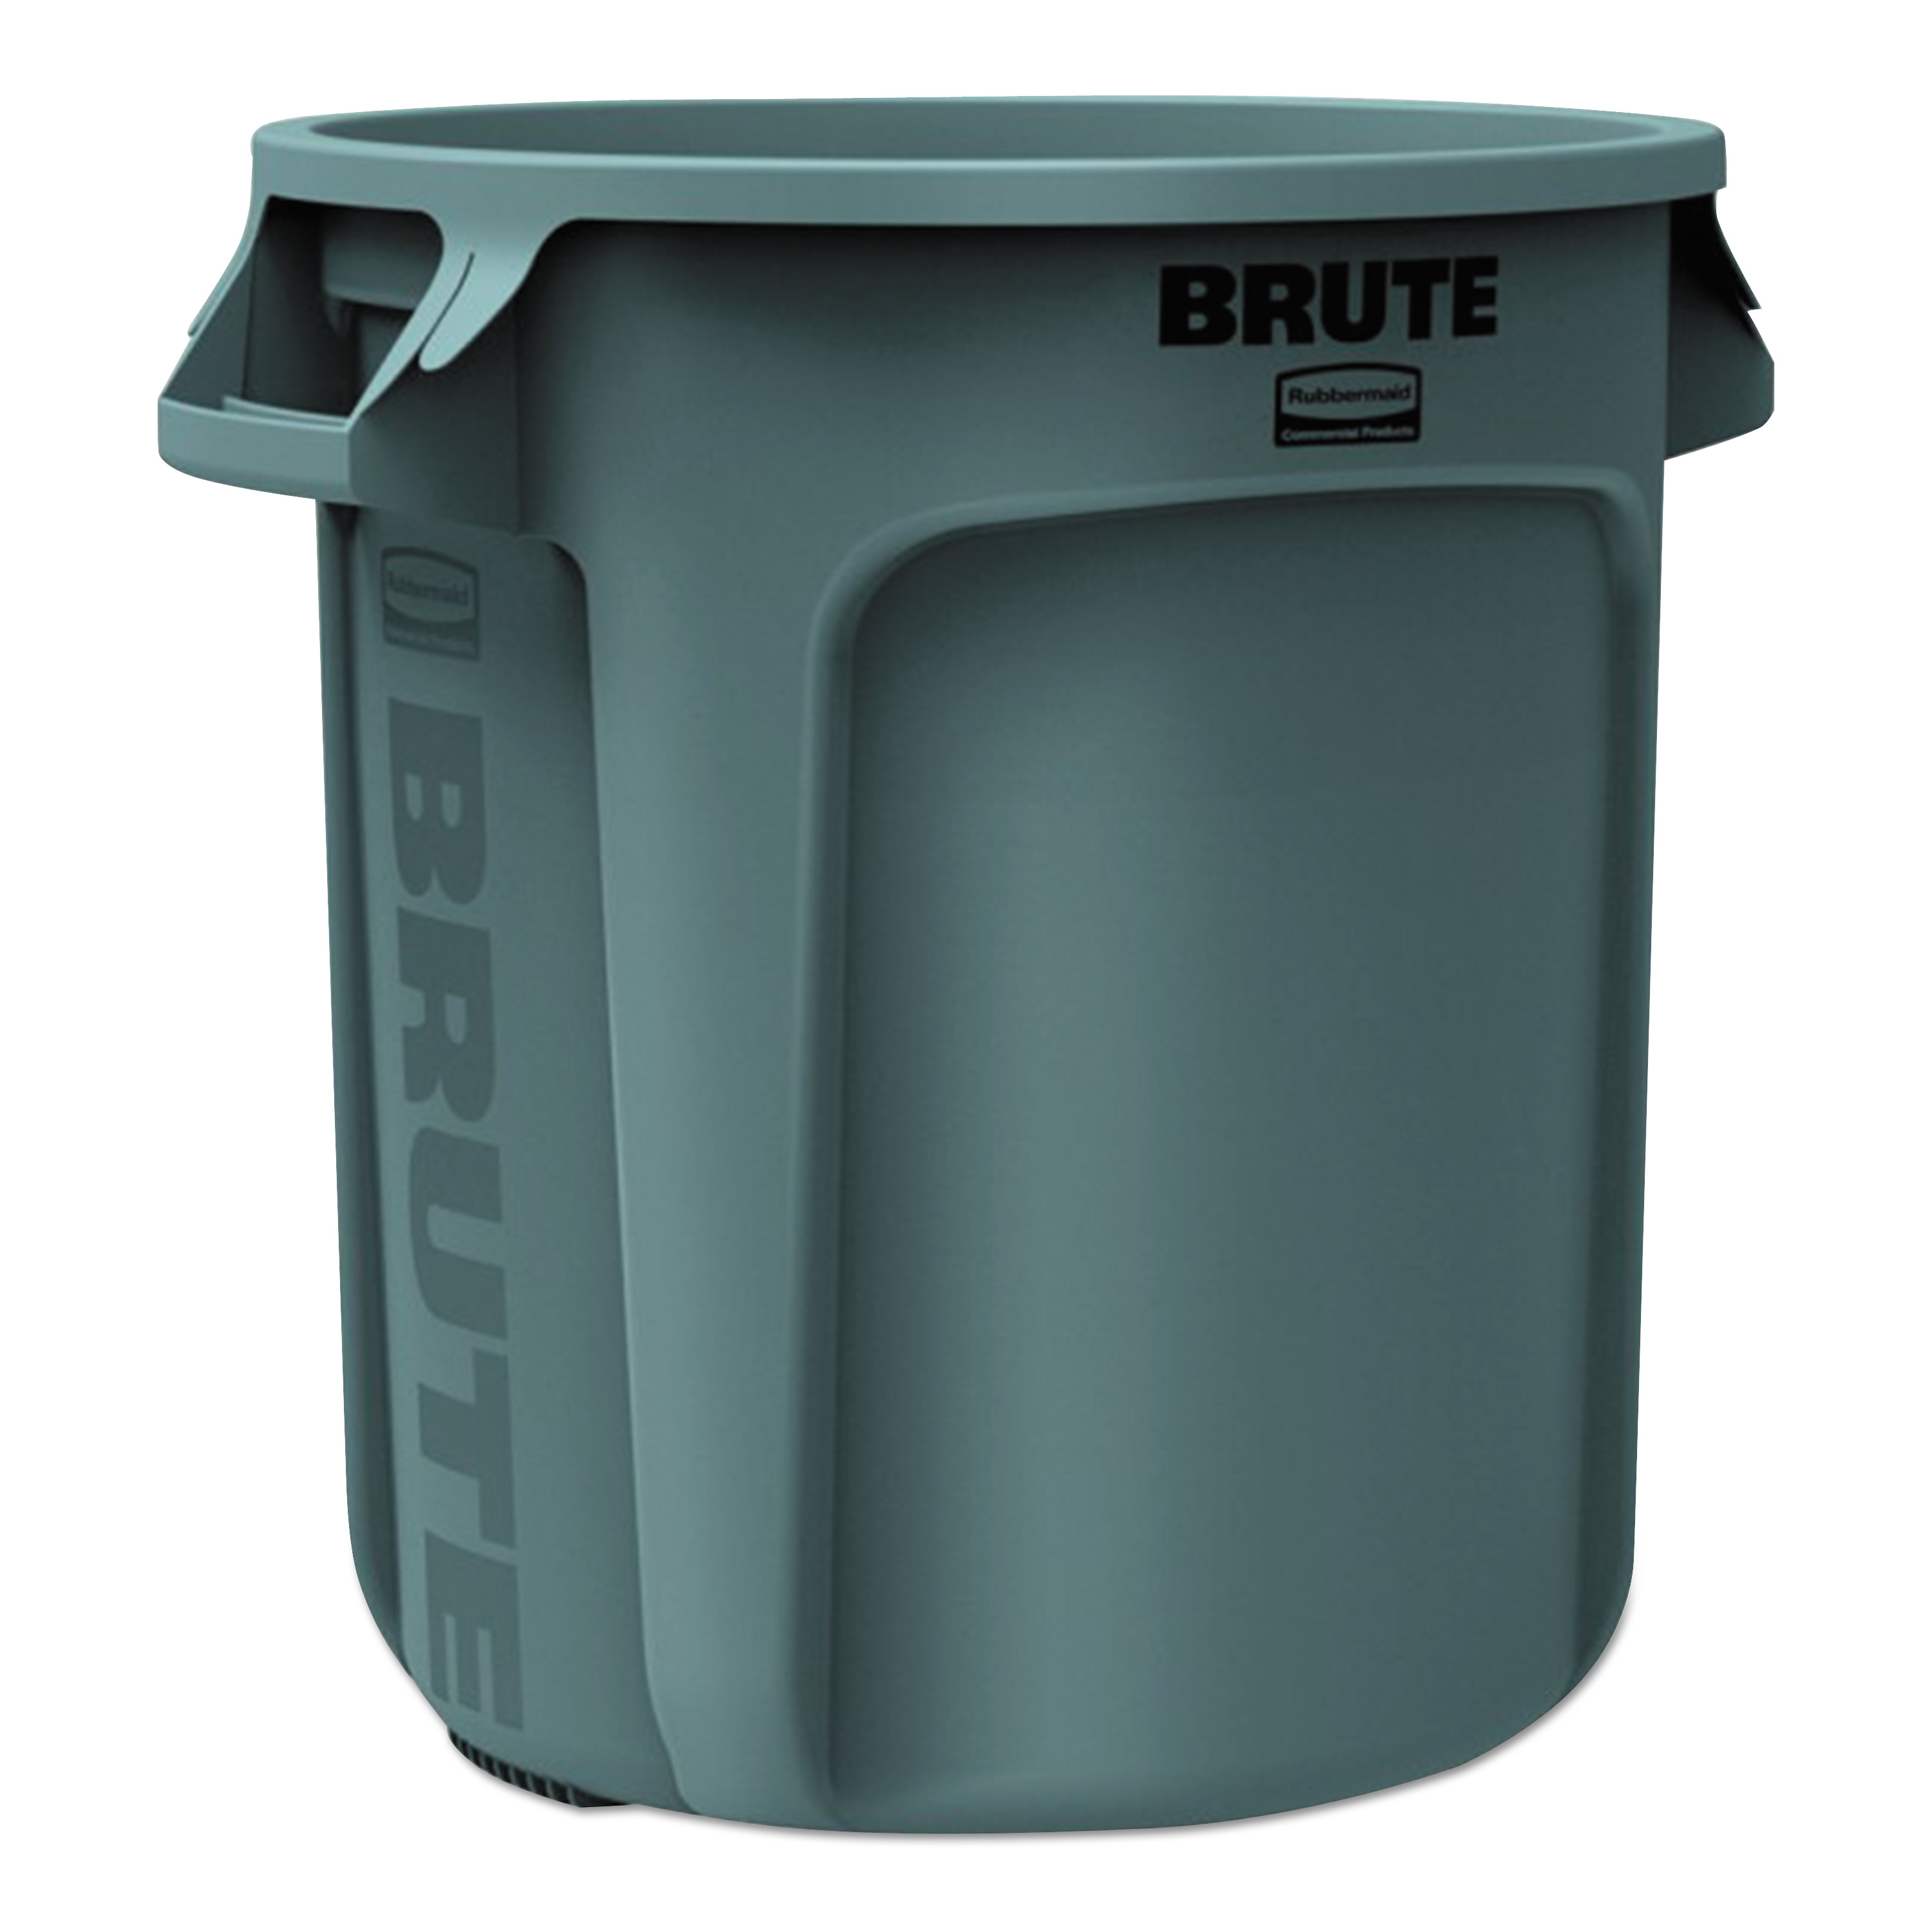  Rubbermaid Commercial FG261000GRAY Round Brute Container, Plastic, 10 gal, Gray (RCP2610GRA) 